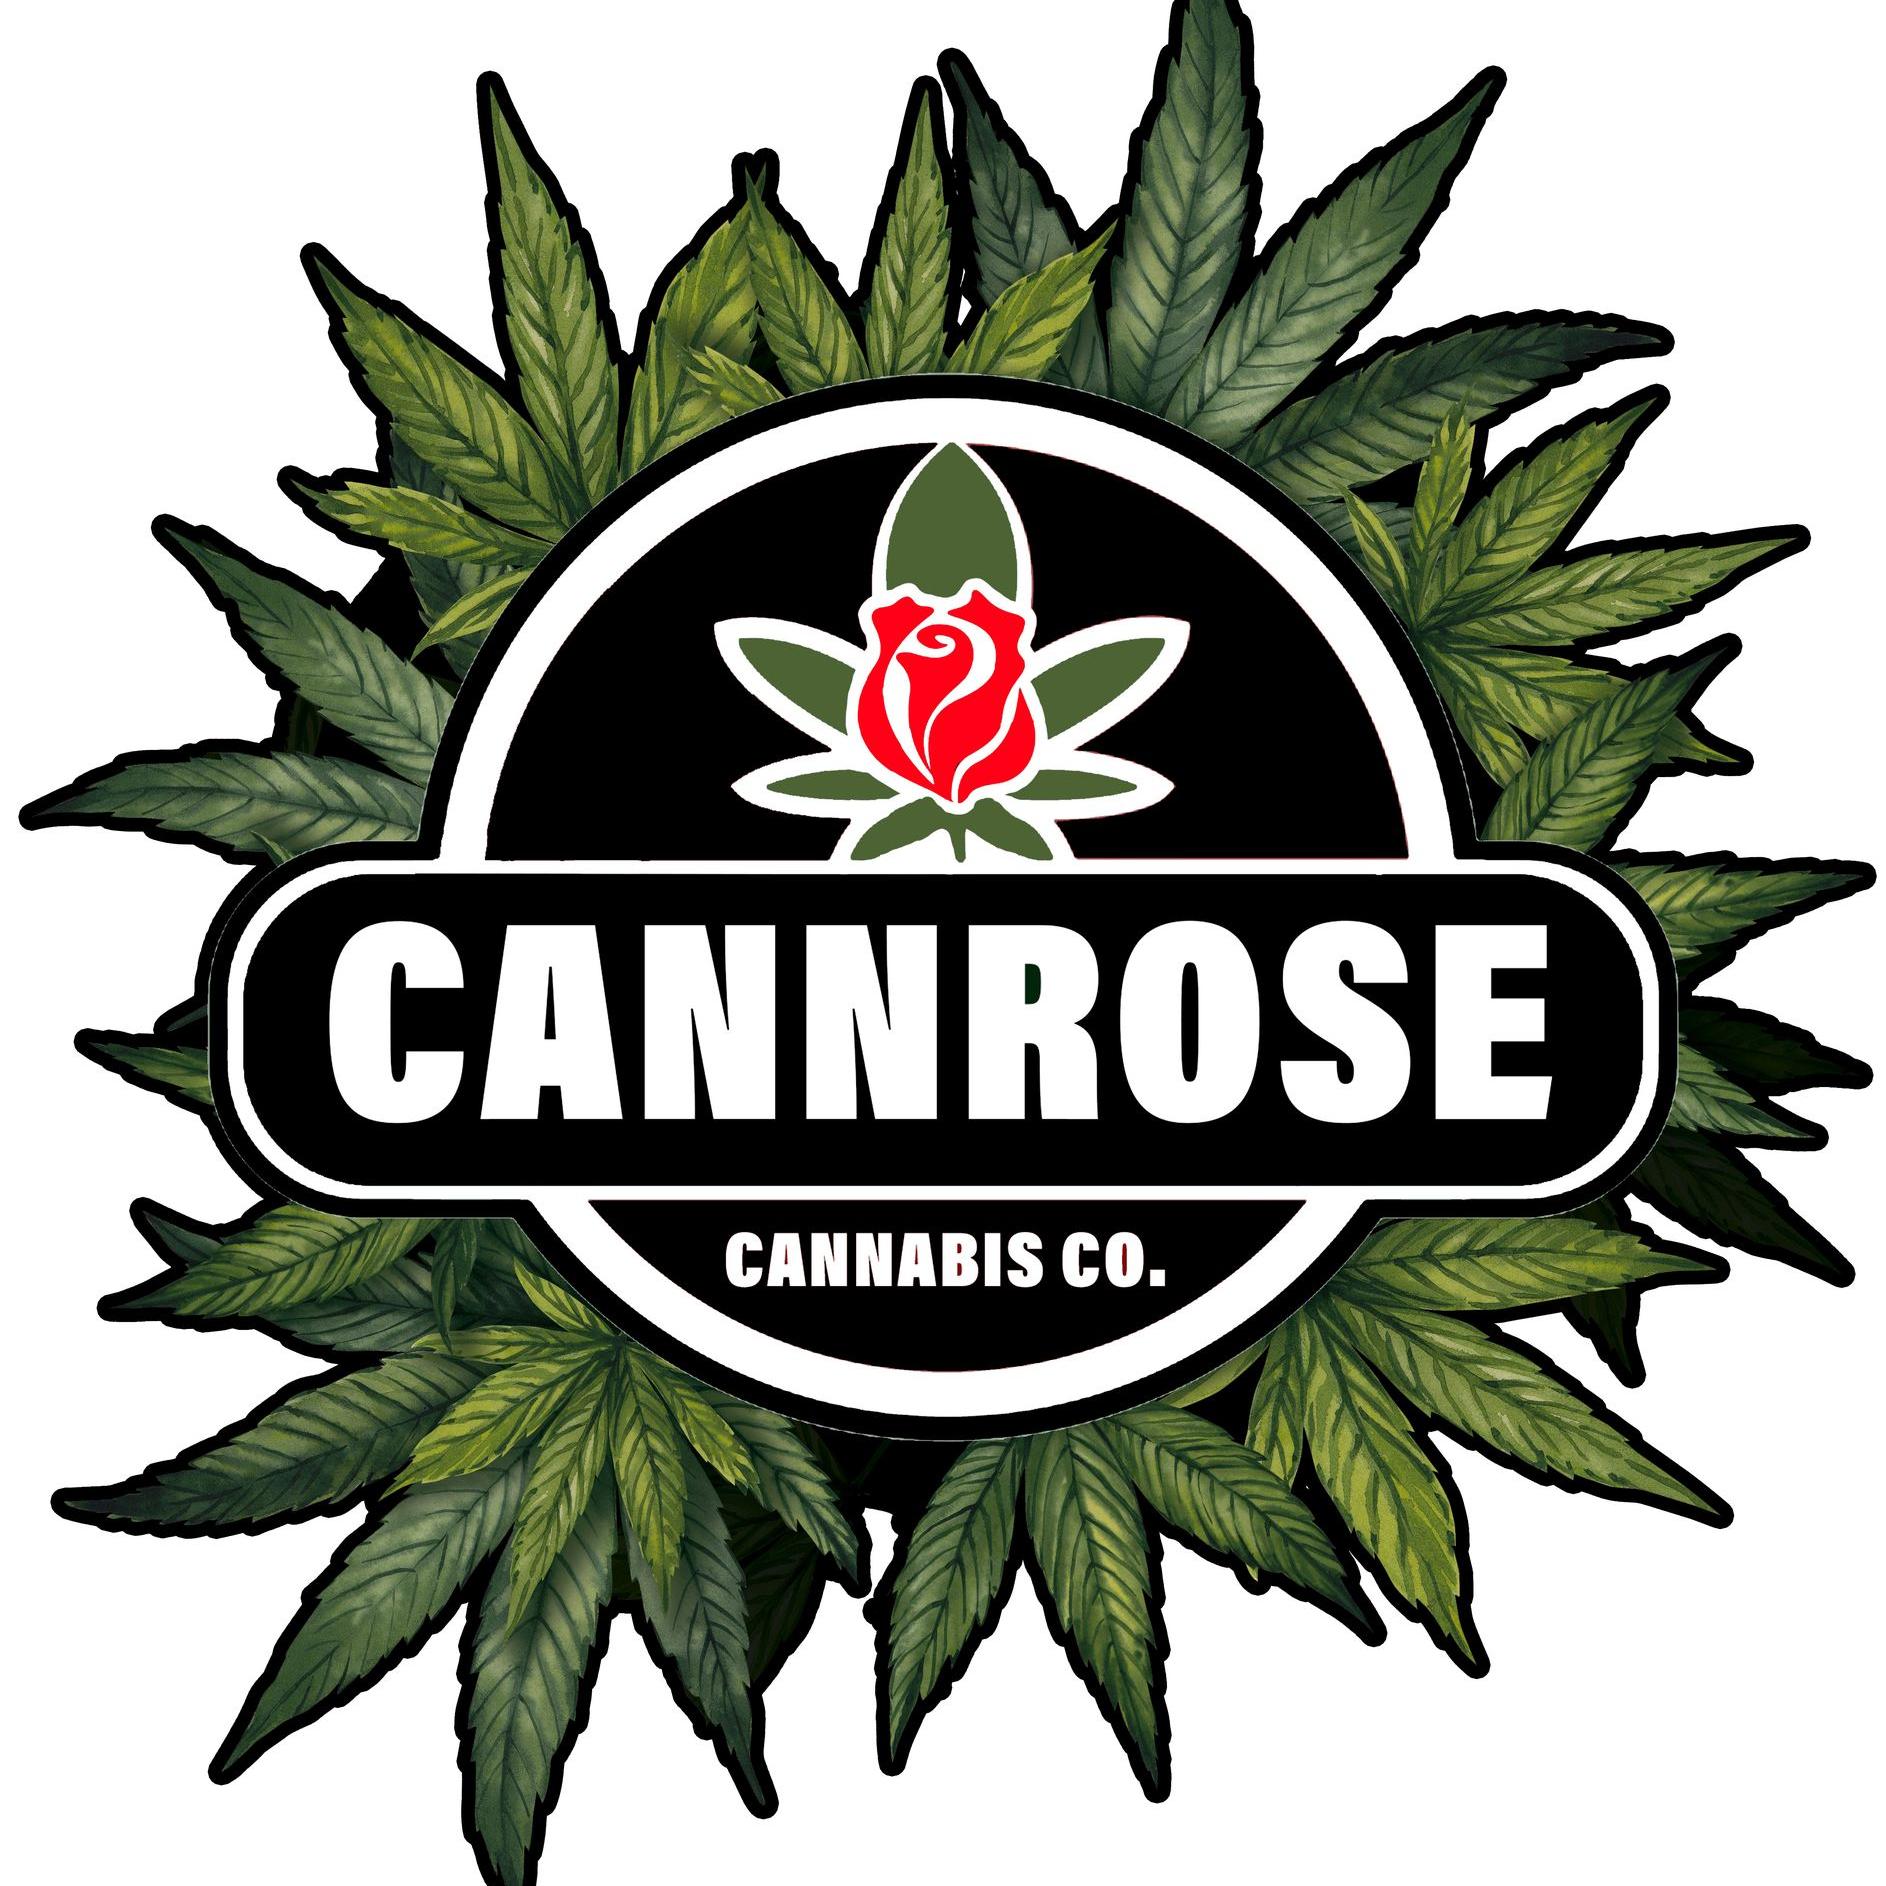 Canrose Cannibis